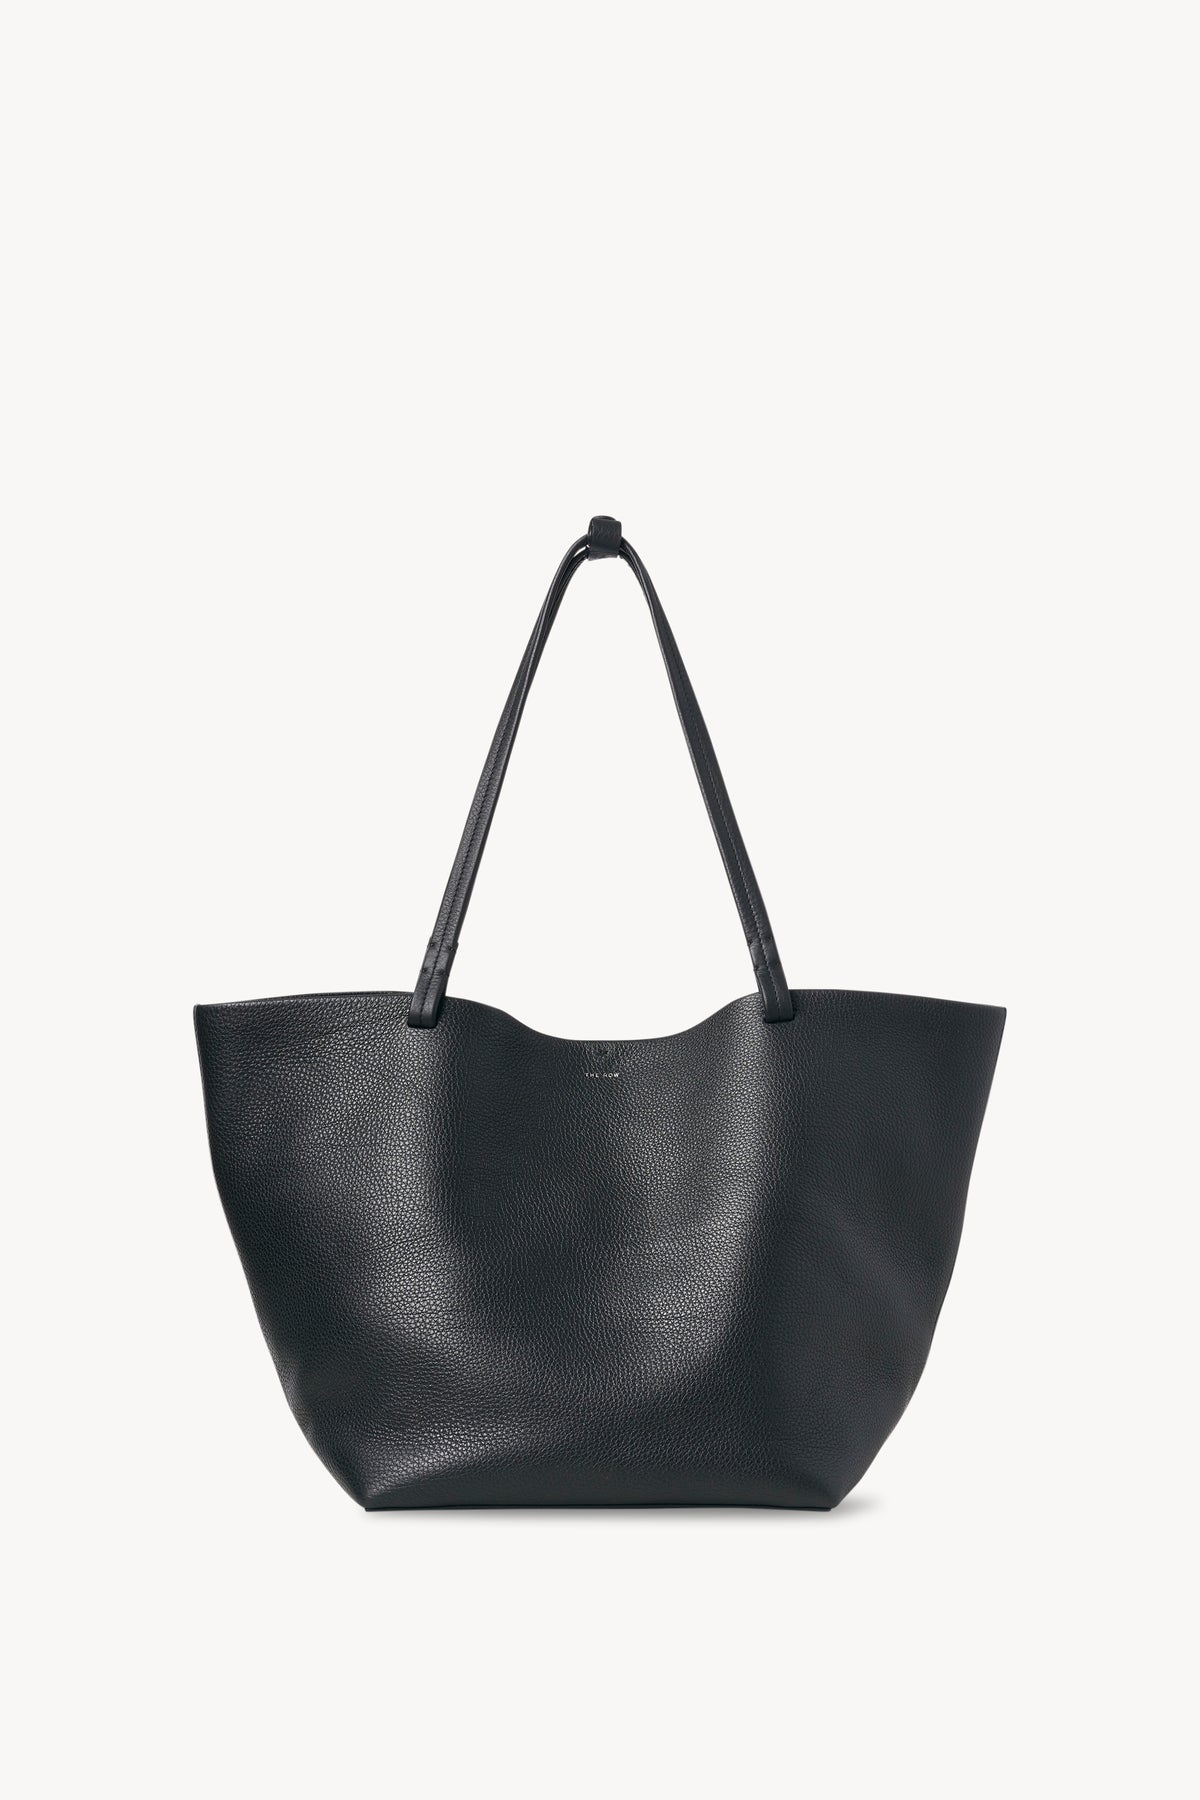 Park Tote Three Bag Black in Leather – The Row